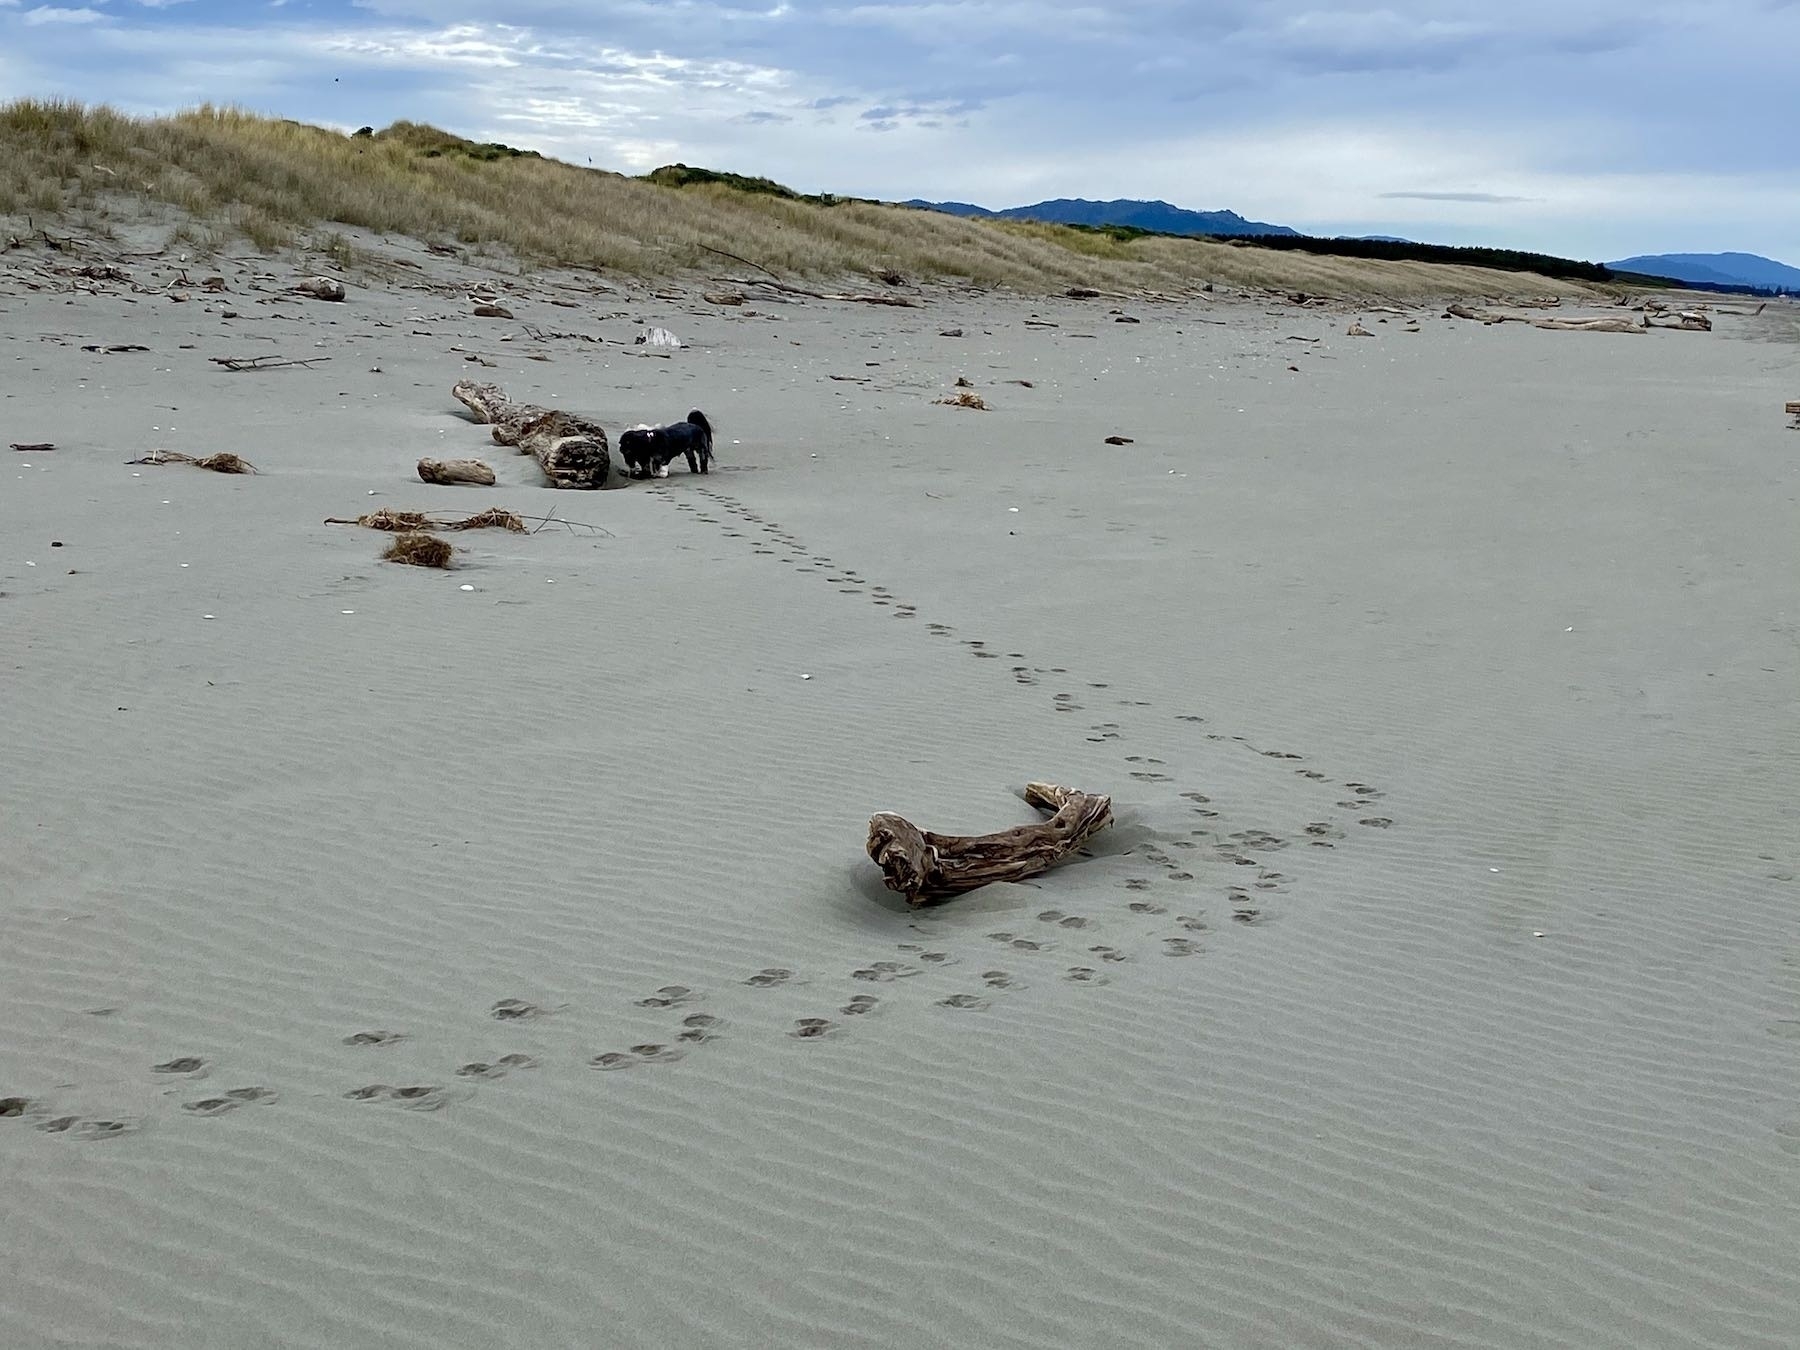 Tracks in the sand, made by two small dogs, veer 90 degrees to the left by one piece of driftwood. The dogs are now at another piece. 